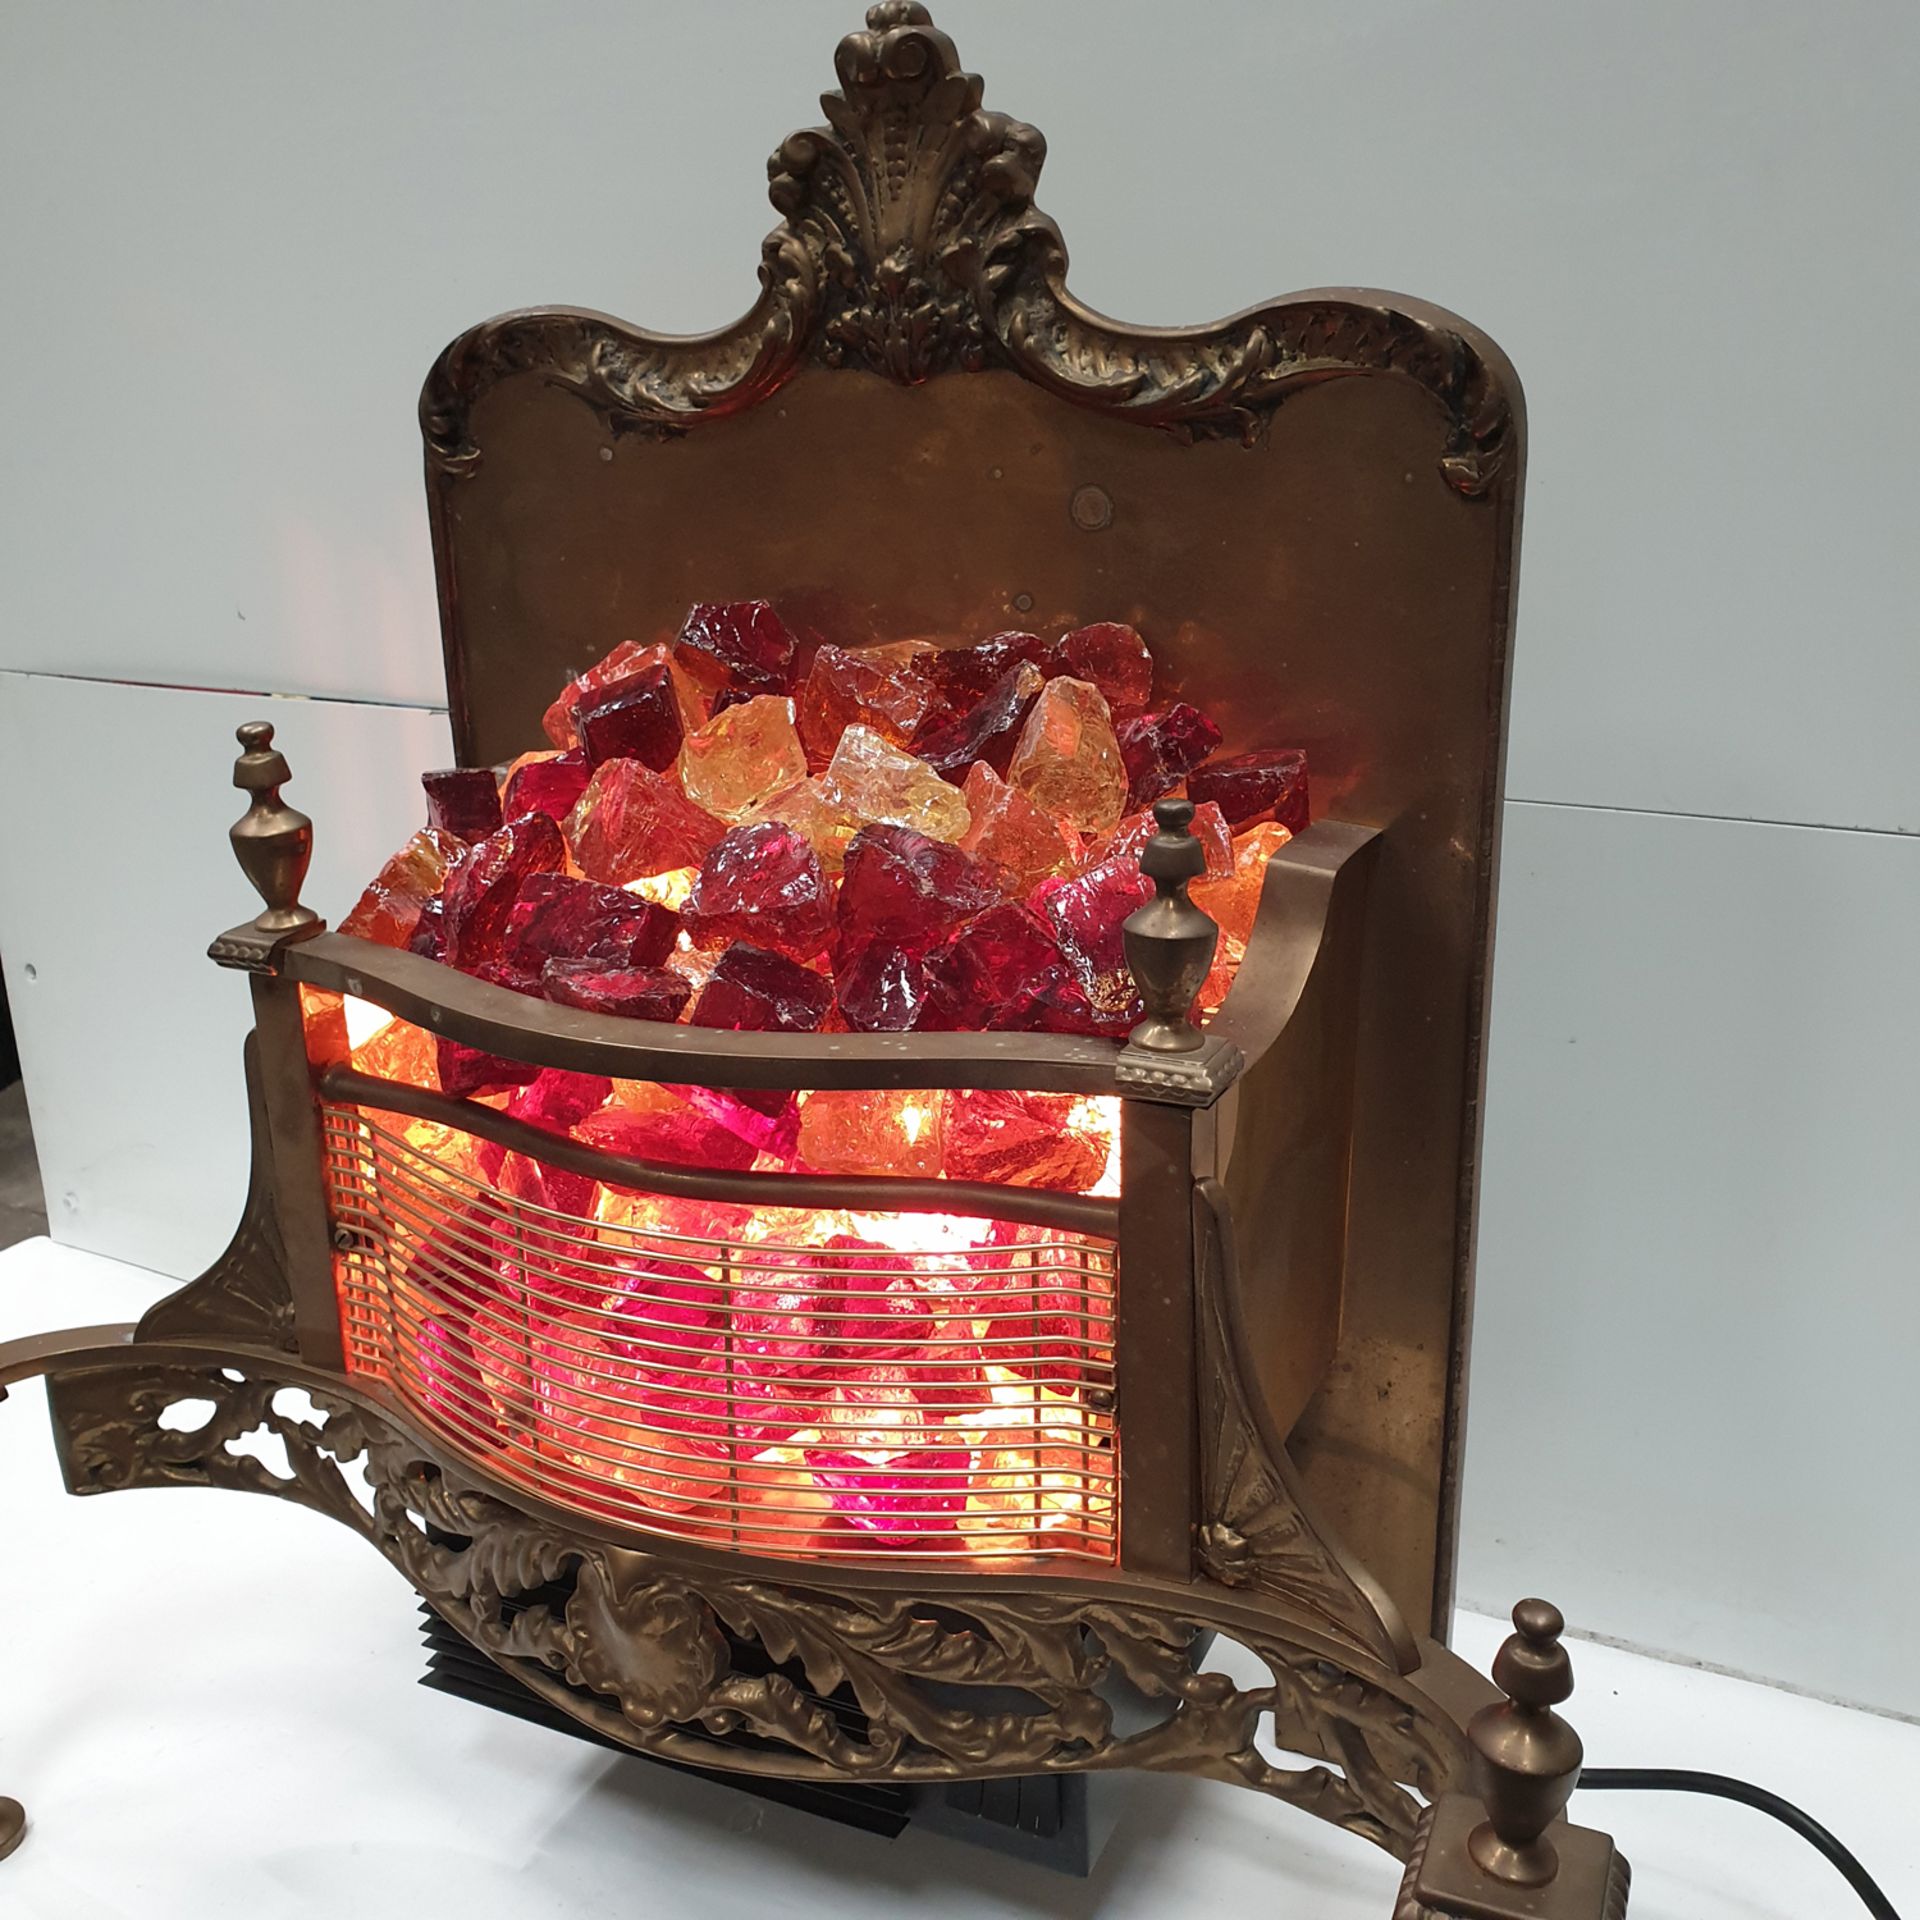 Brass Electric Fire, with Fire Effect Lighting and Glass Stones. - Image 3 of 8